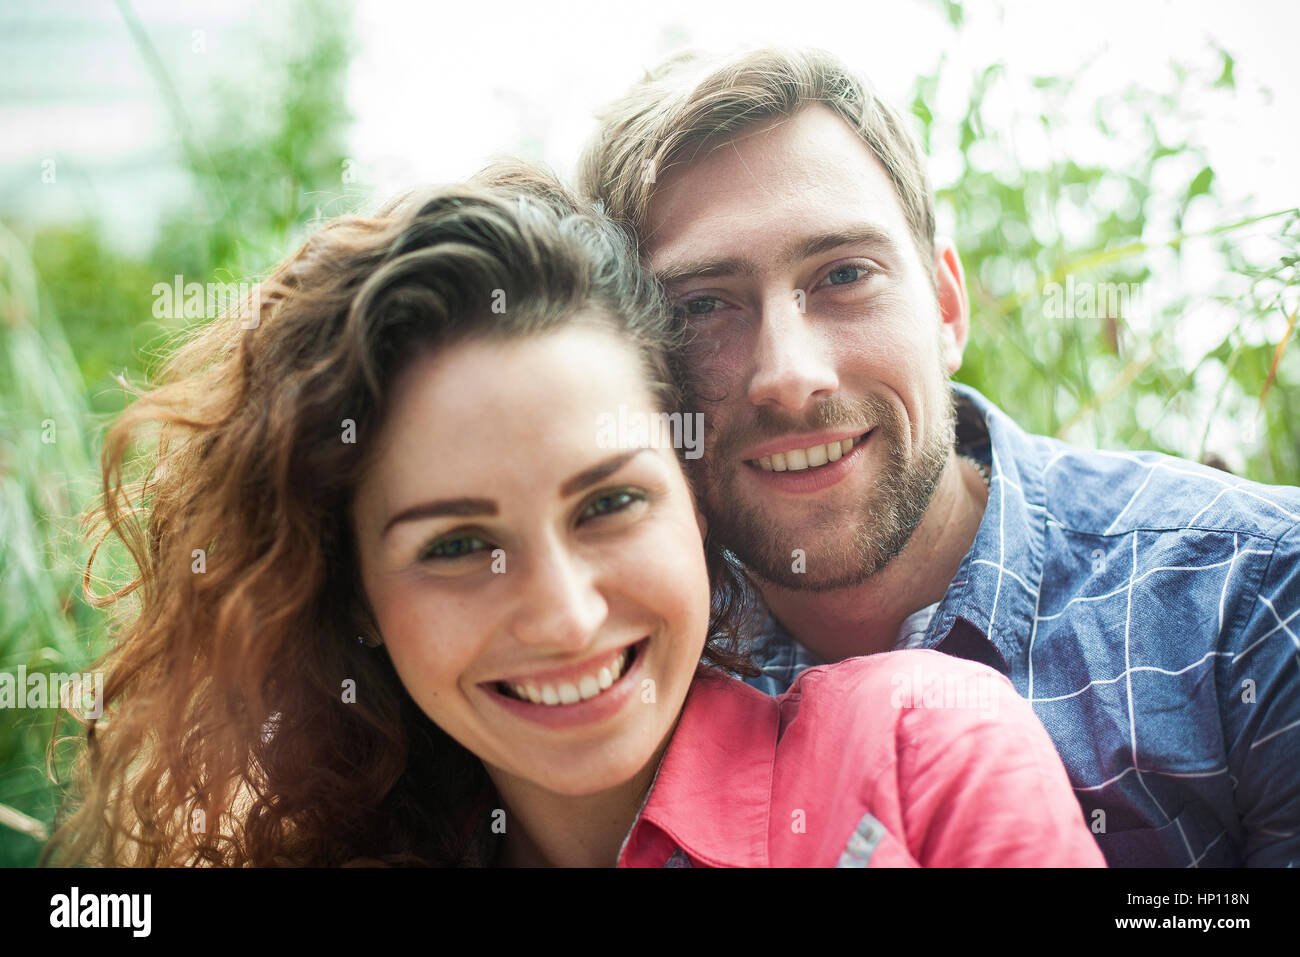 Couple together outdoors, portait Stock Photo